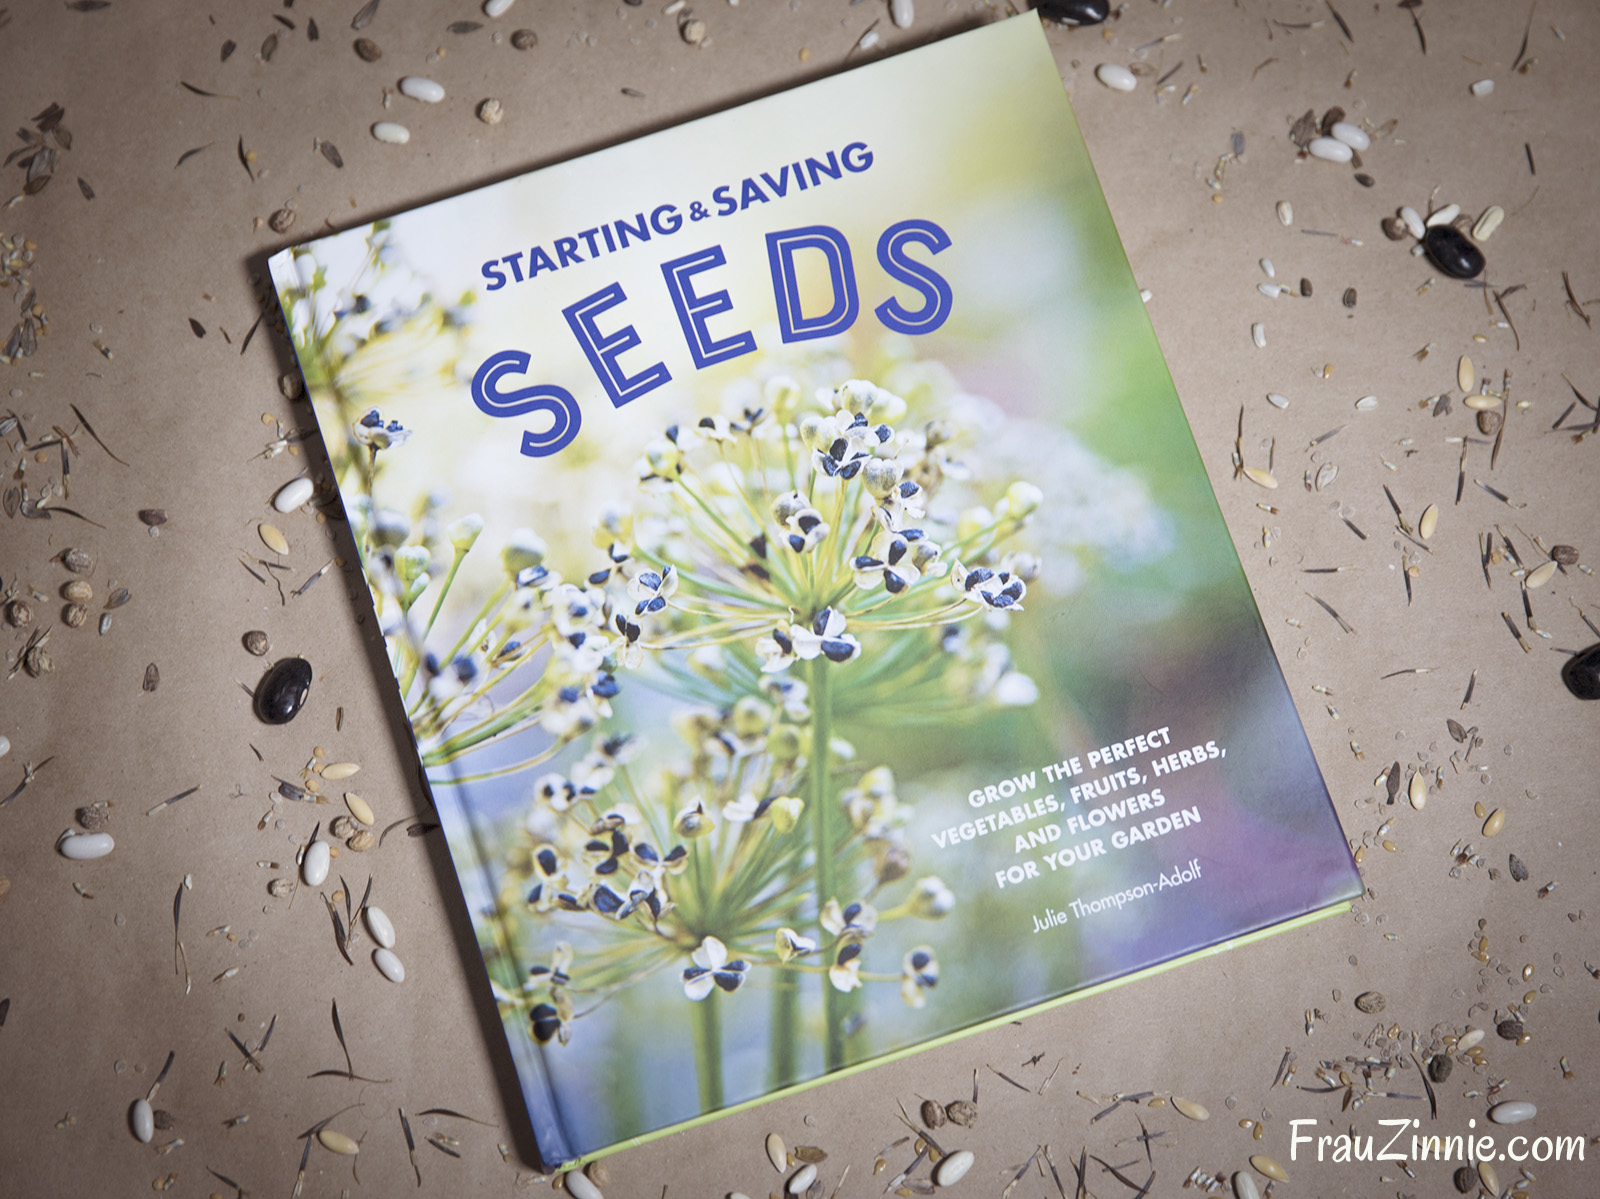 Book Review: ‘Starting & Saving Seeds’ sets gardeners up for success ...